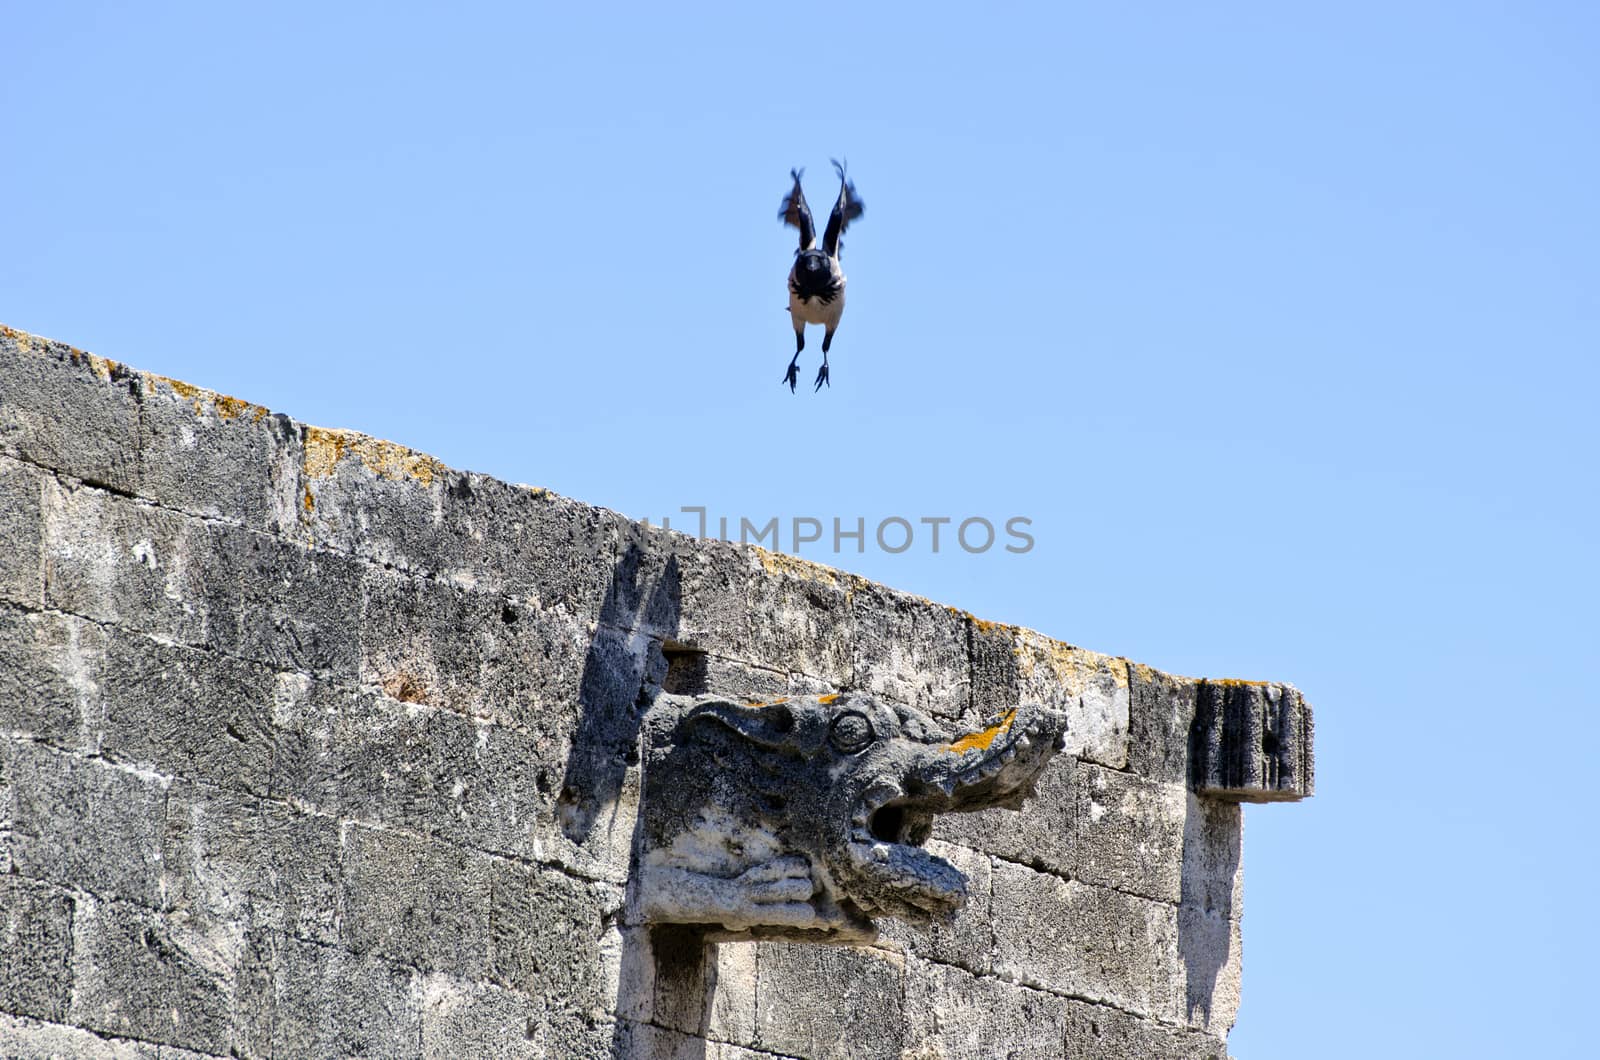 Hooded crow taking flight off ancient building, Greece